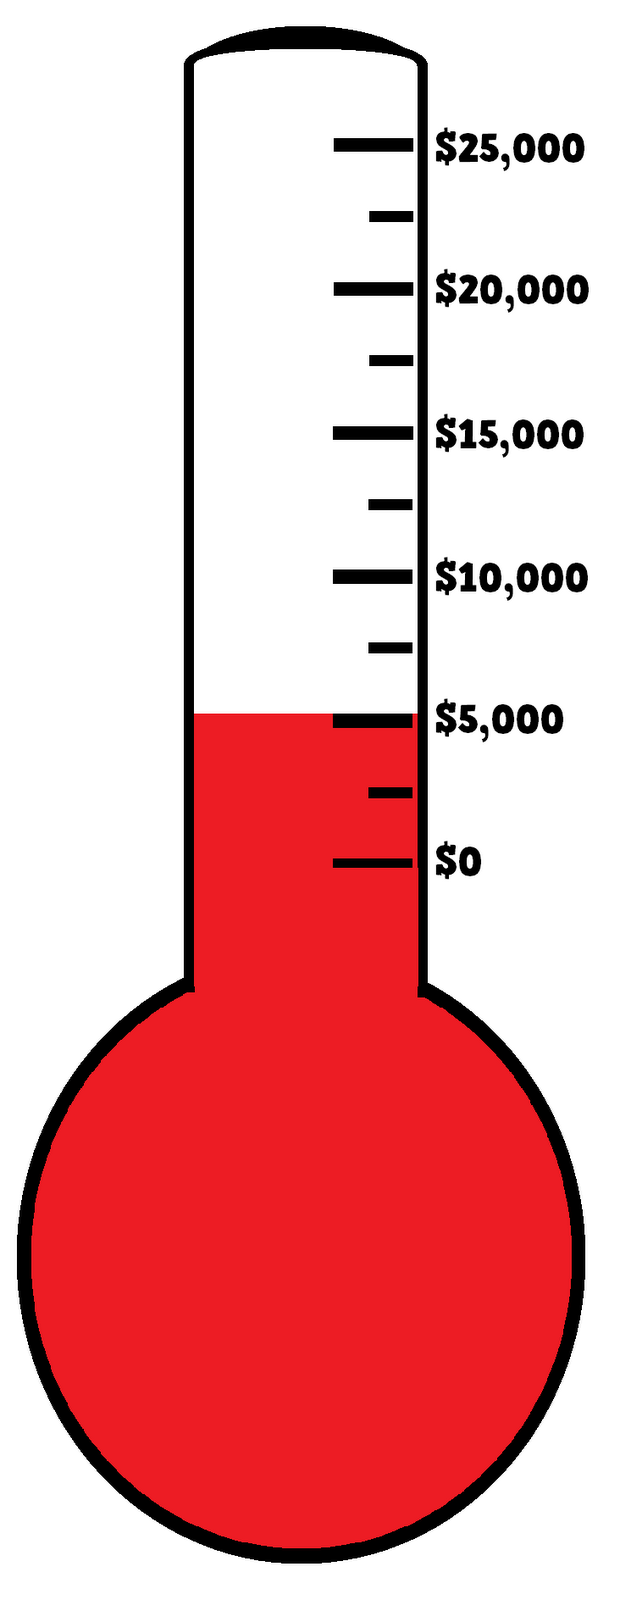 Blank Fundraising Thermometer Clipart